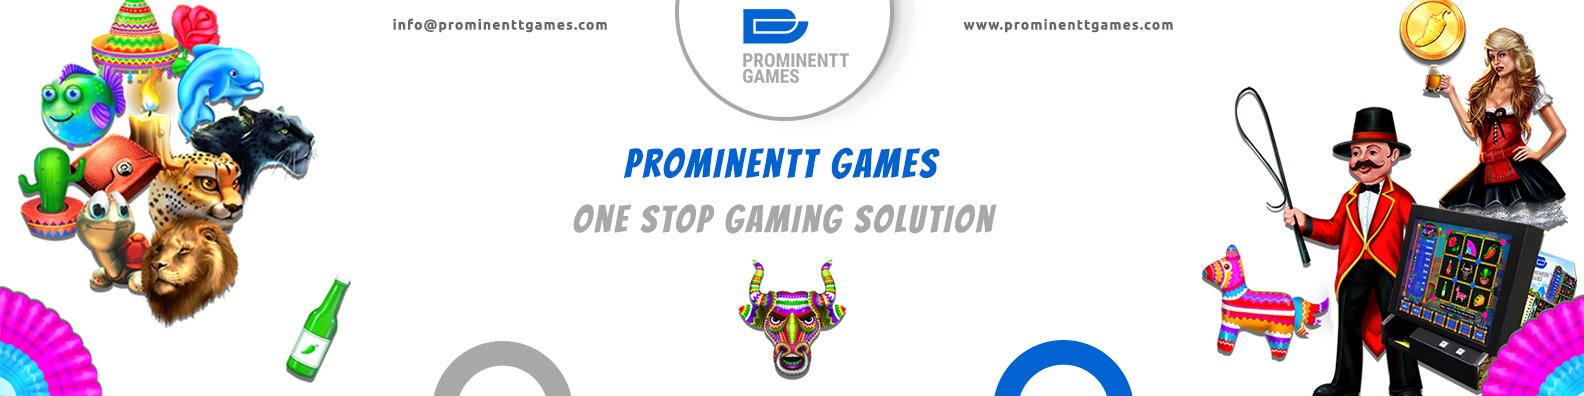 Prominentt Games cover